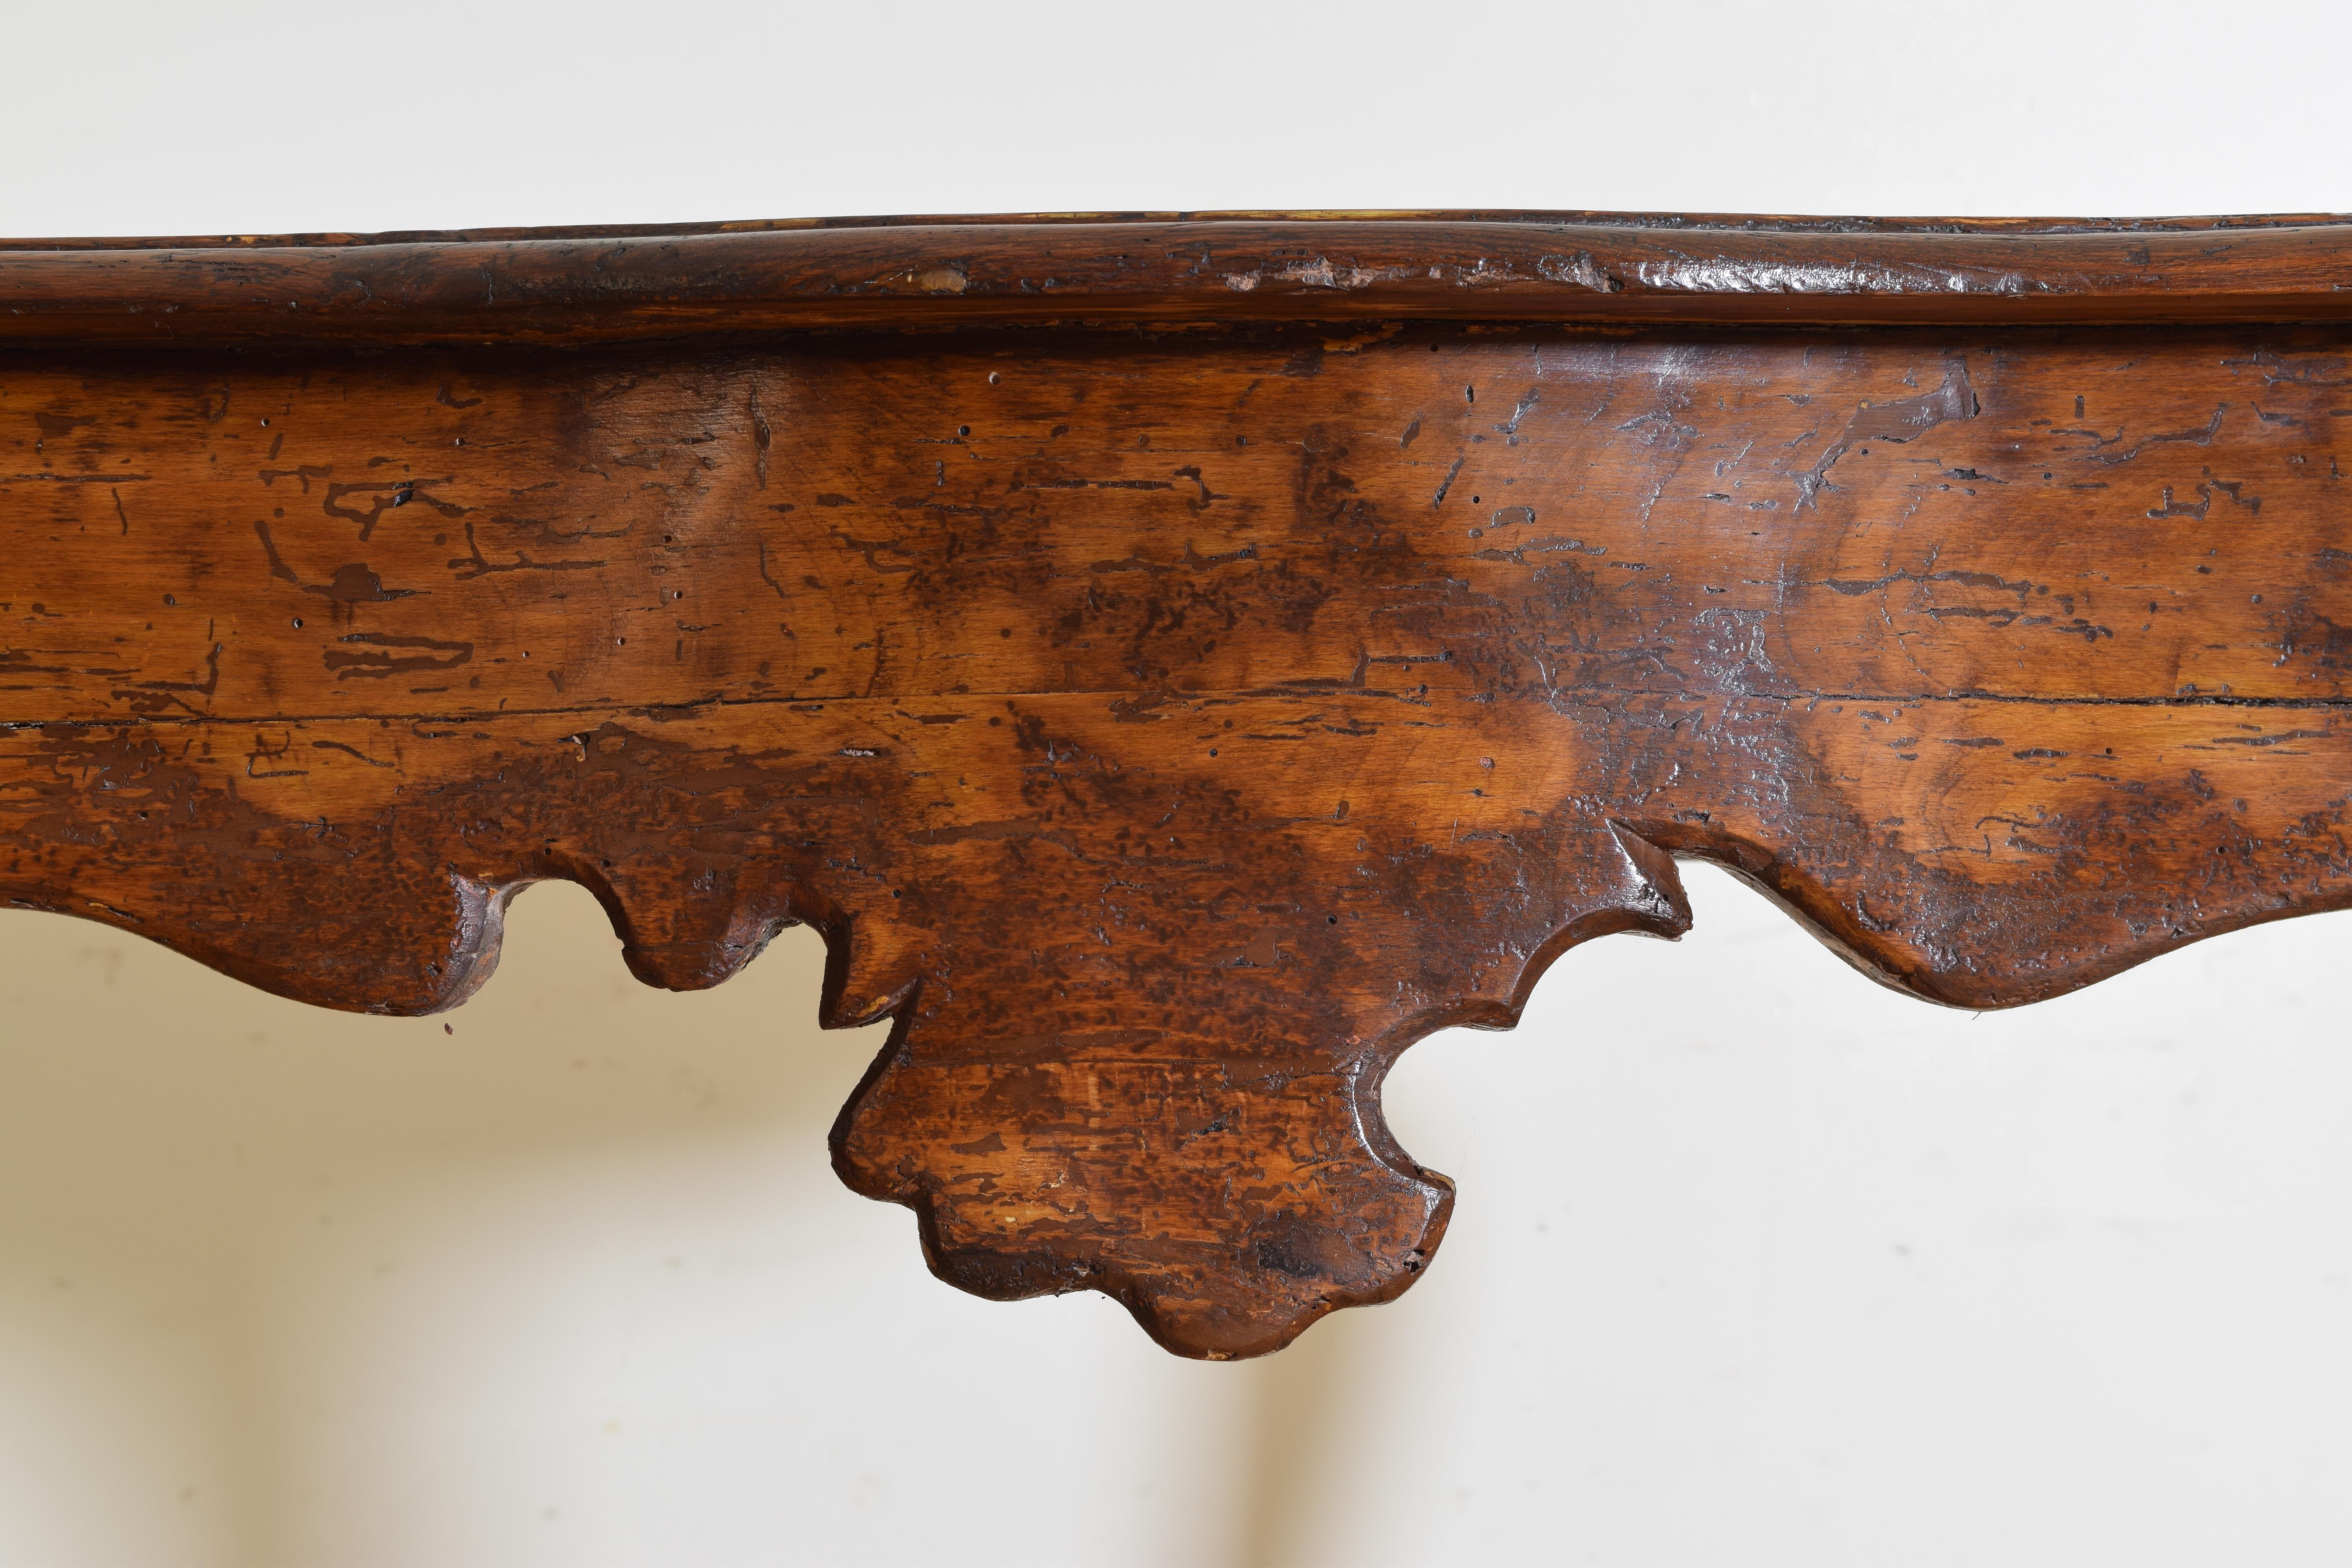 Italian, Tuscan, Louis XIV Shaped Walnut & Fir Wood Console Table, mid 18th c For Sale 2